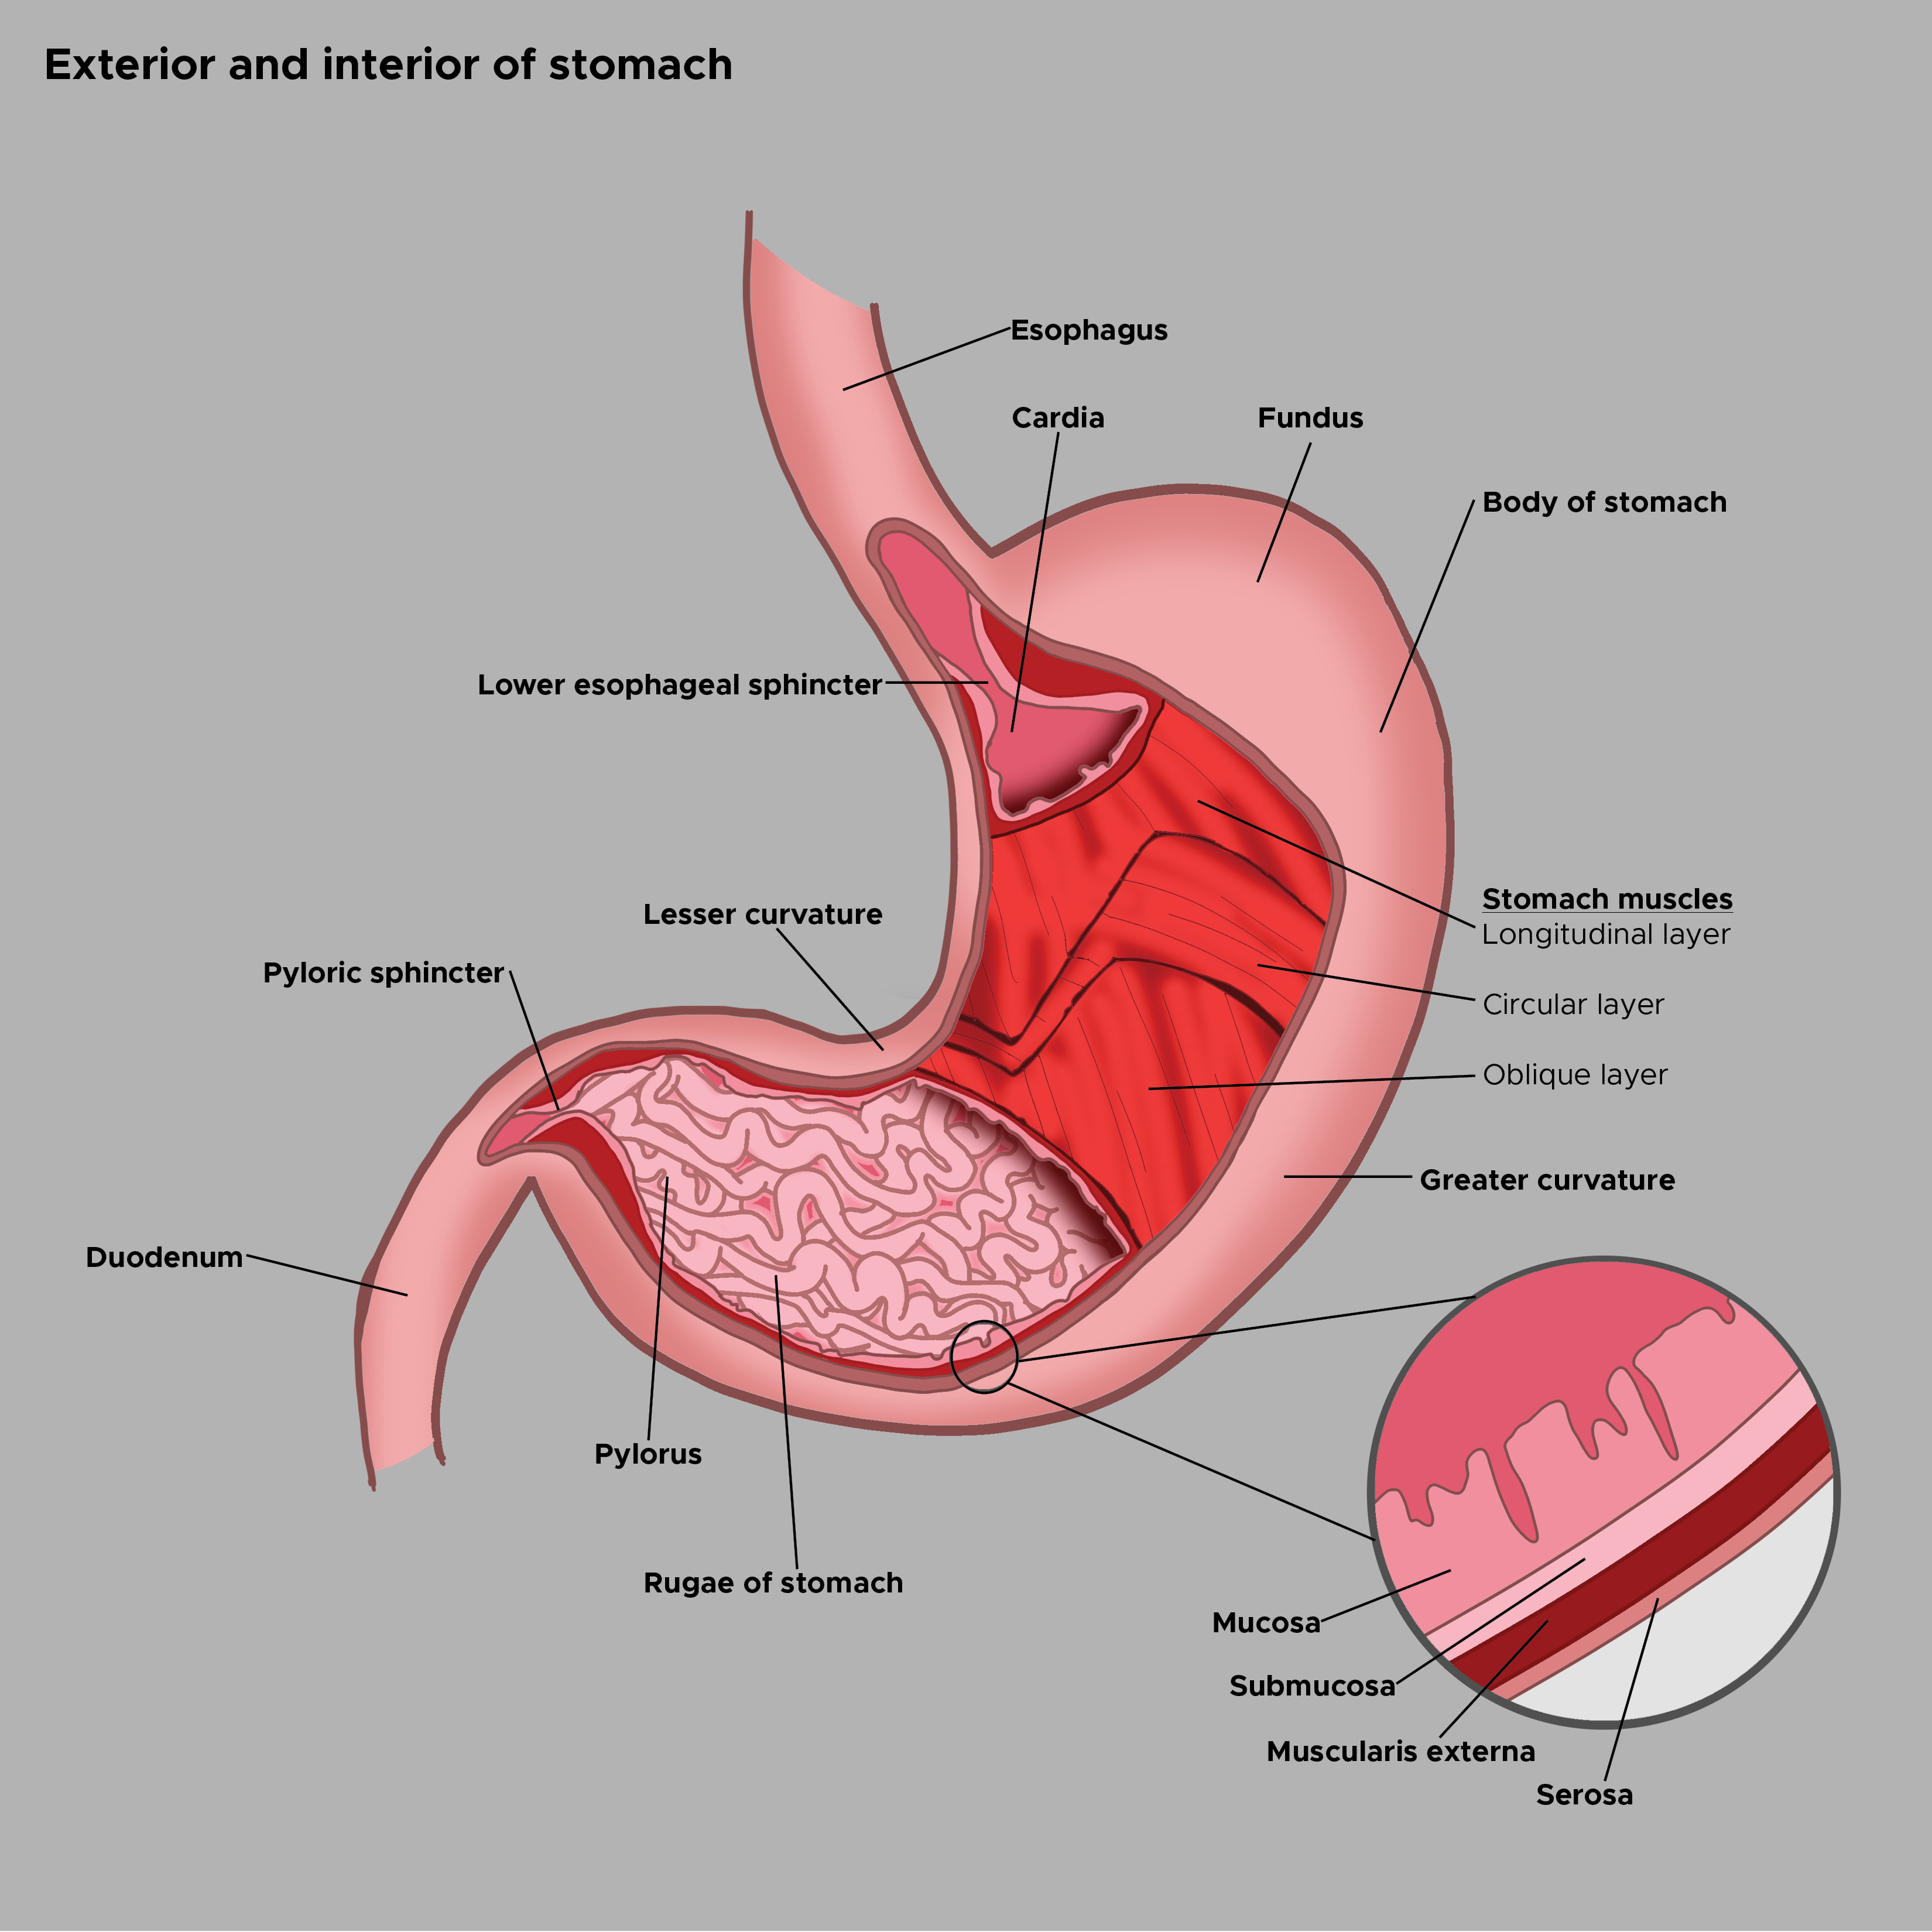 Illustration of the exterior and interior of the stomach